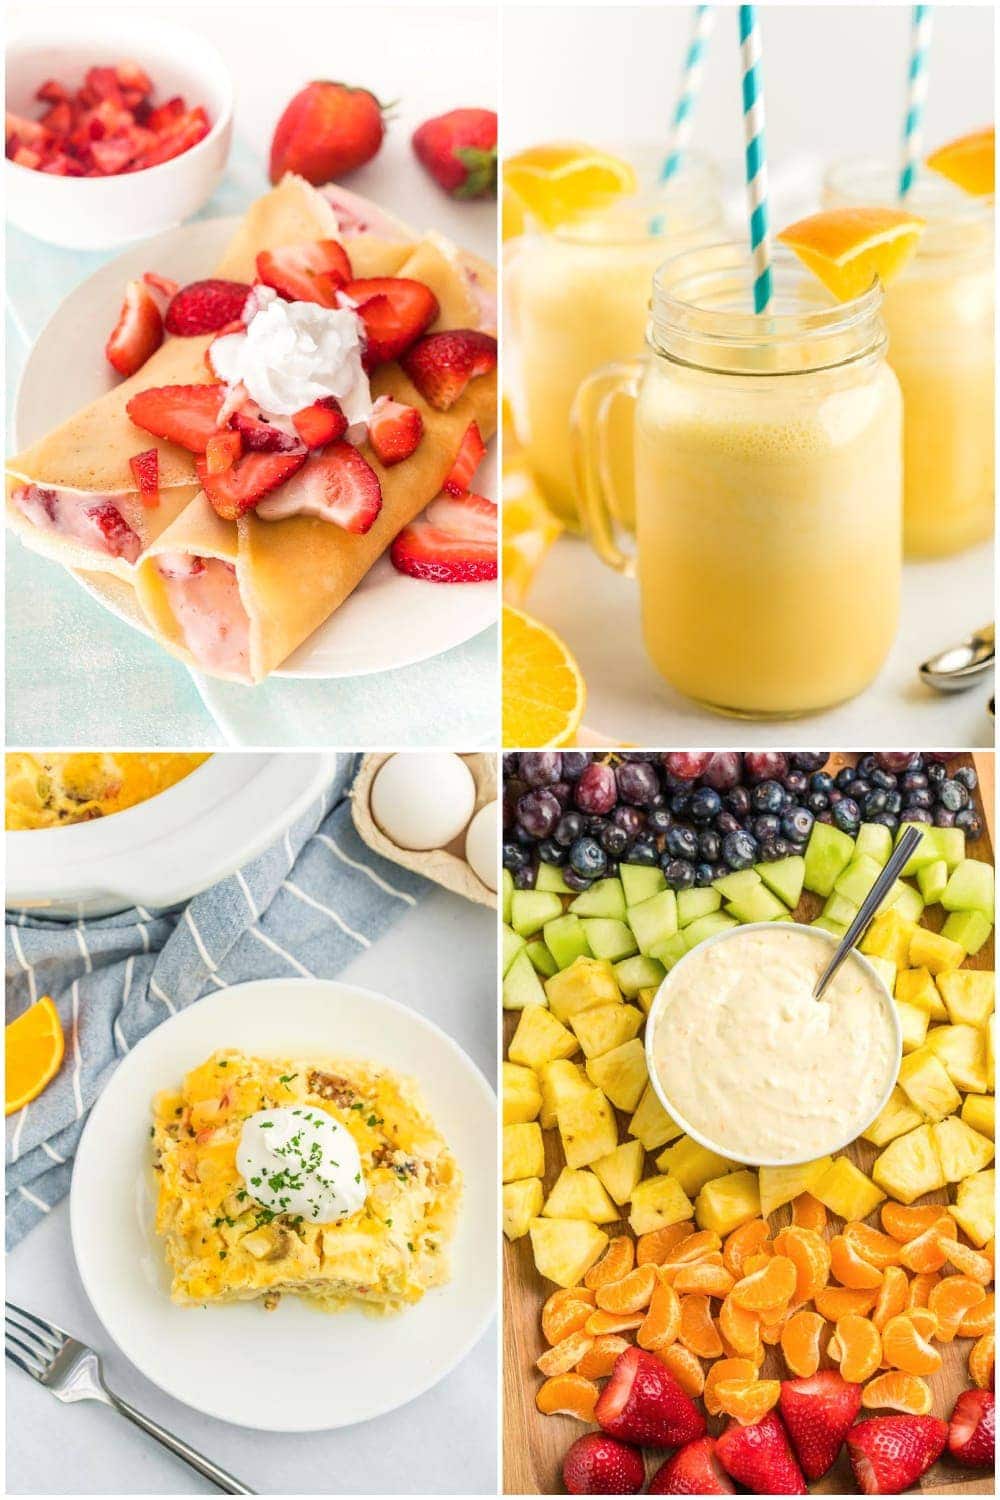 Fun Ideas for Hosting a Brunch Party - Inspiration & Recipes